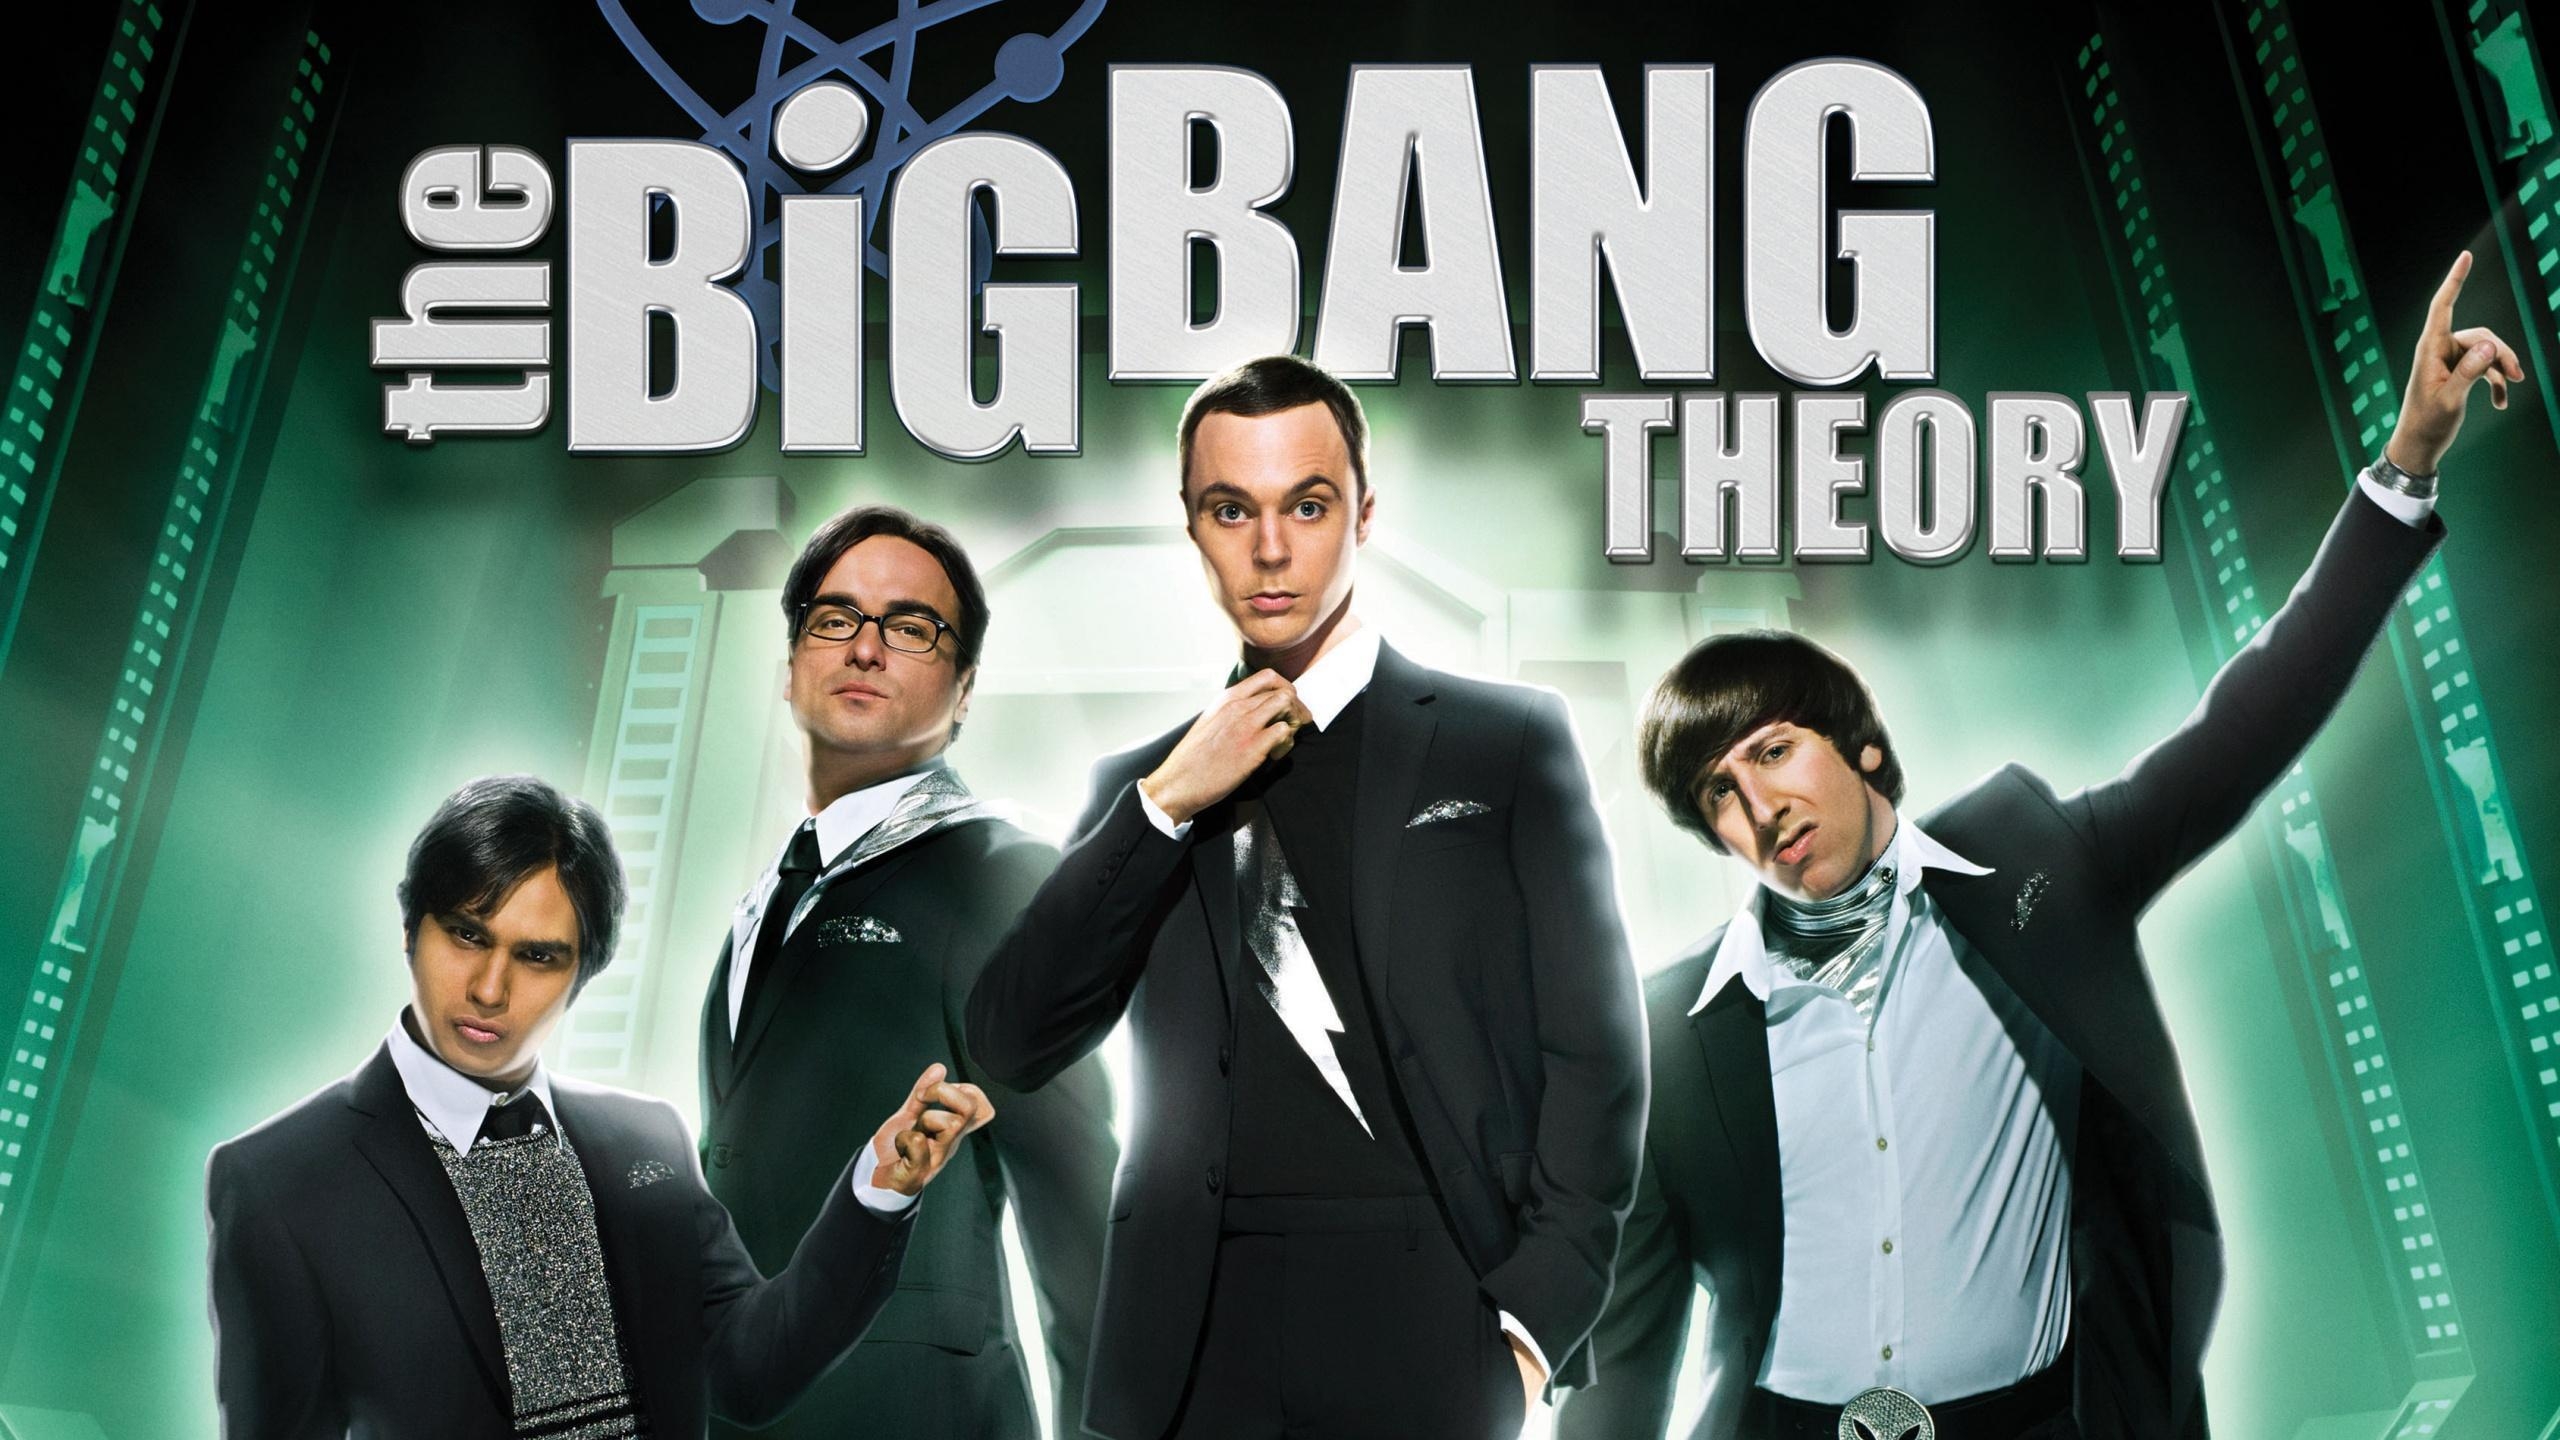 The Big Bang Theory Cool for 2560x1440 HDTV resolution